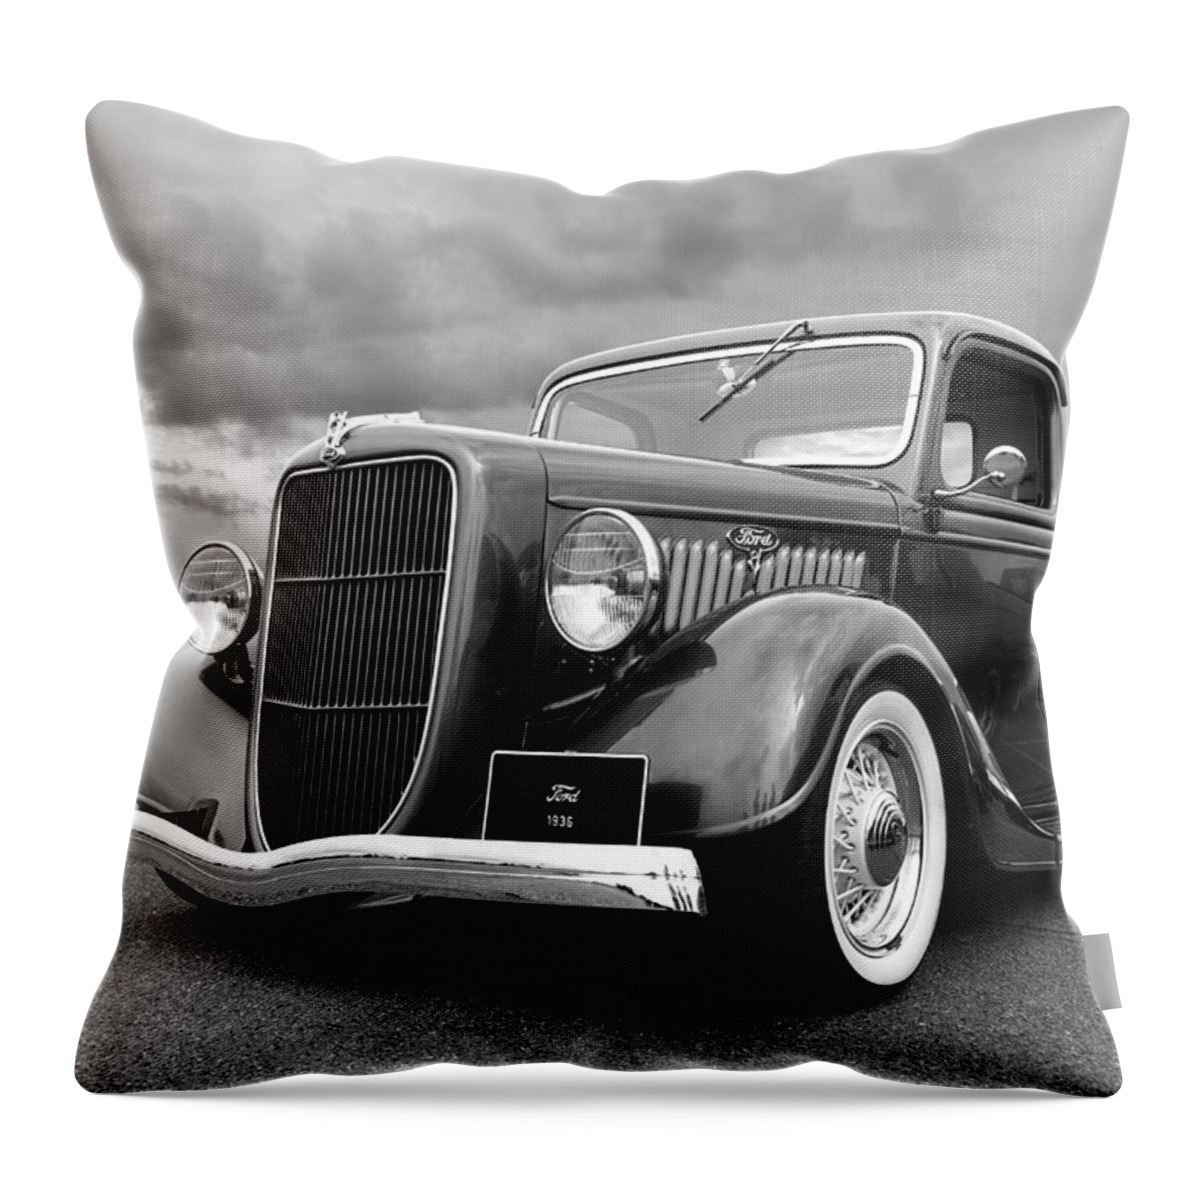 1936 Ford V8 Throw Pillow featuring the photograph 1936 Ford V8 in Black and White by Gill Billington